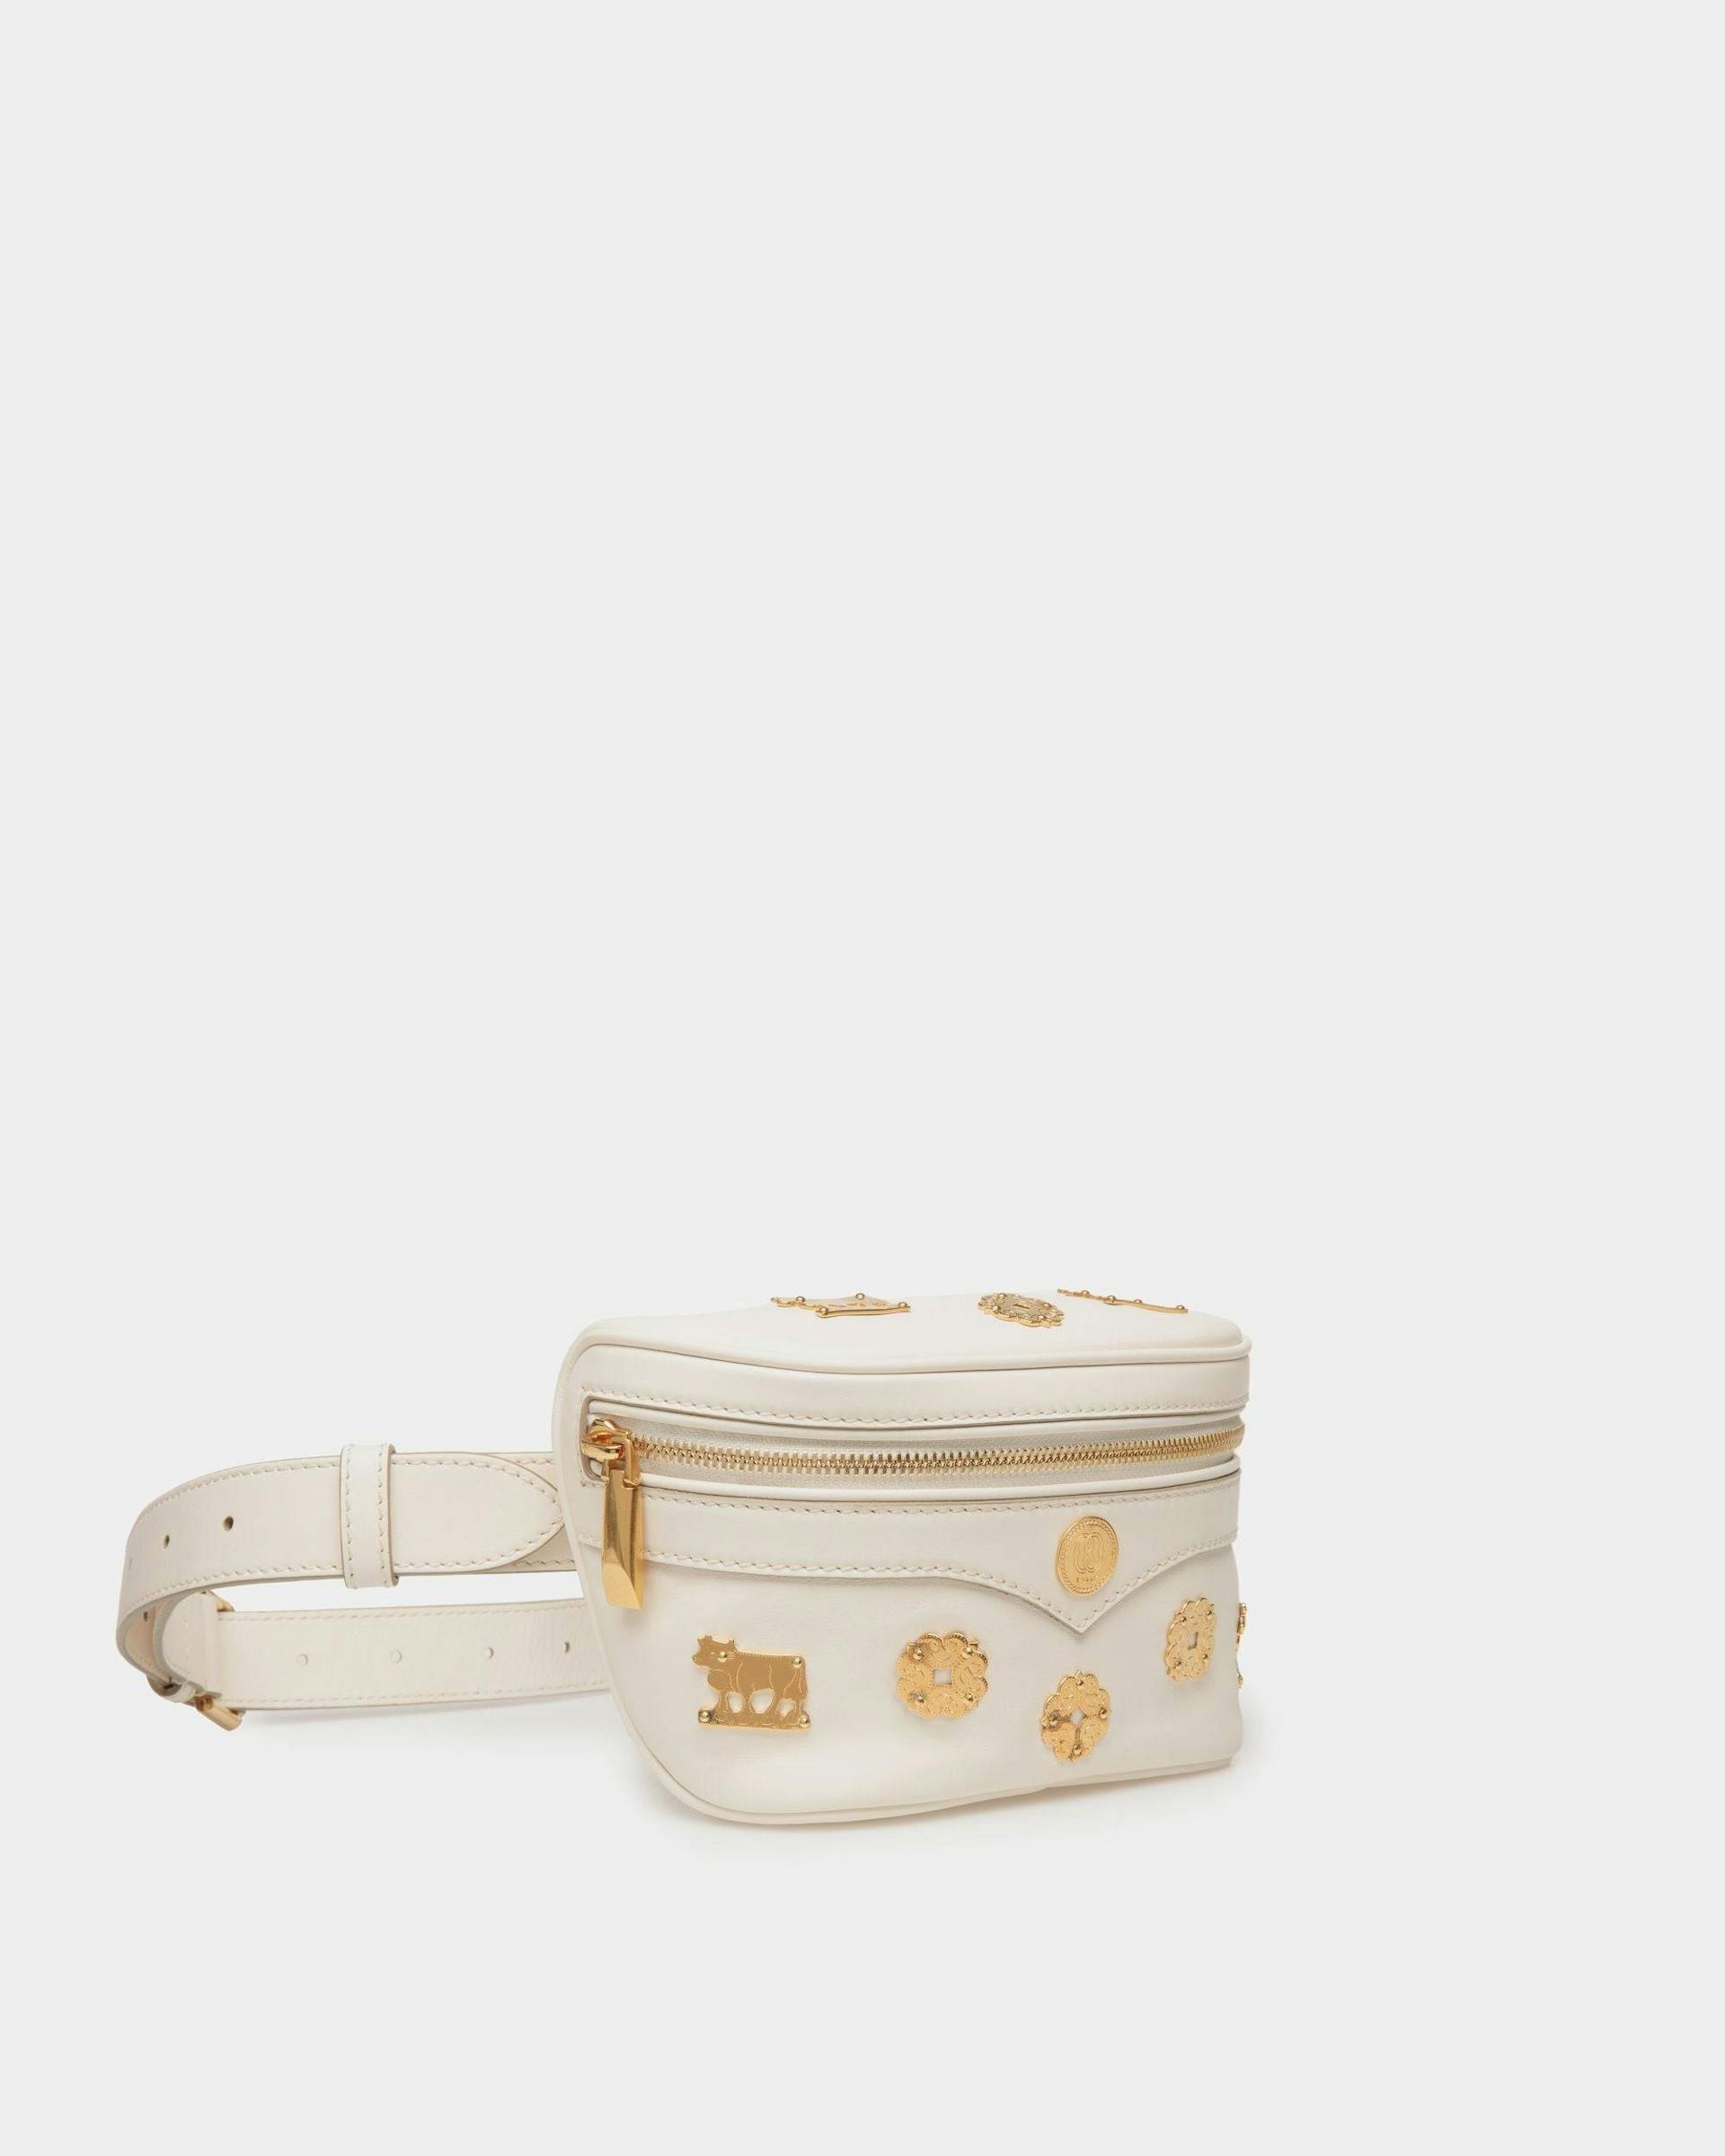 Women's Moutain Belt Bag  in White Leather | Bally | Still Life 3/4 Front